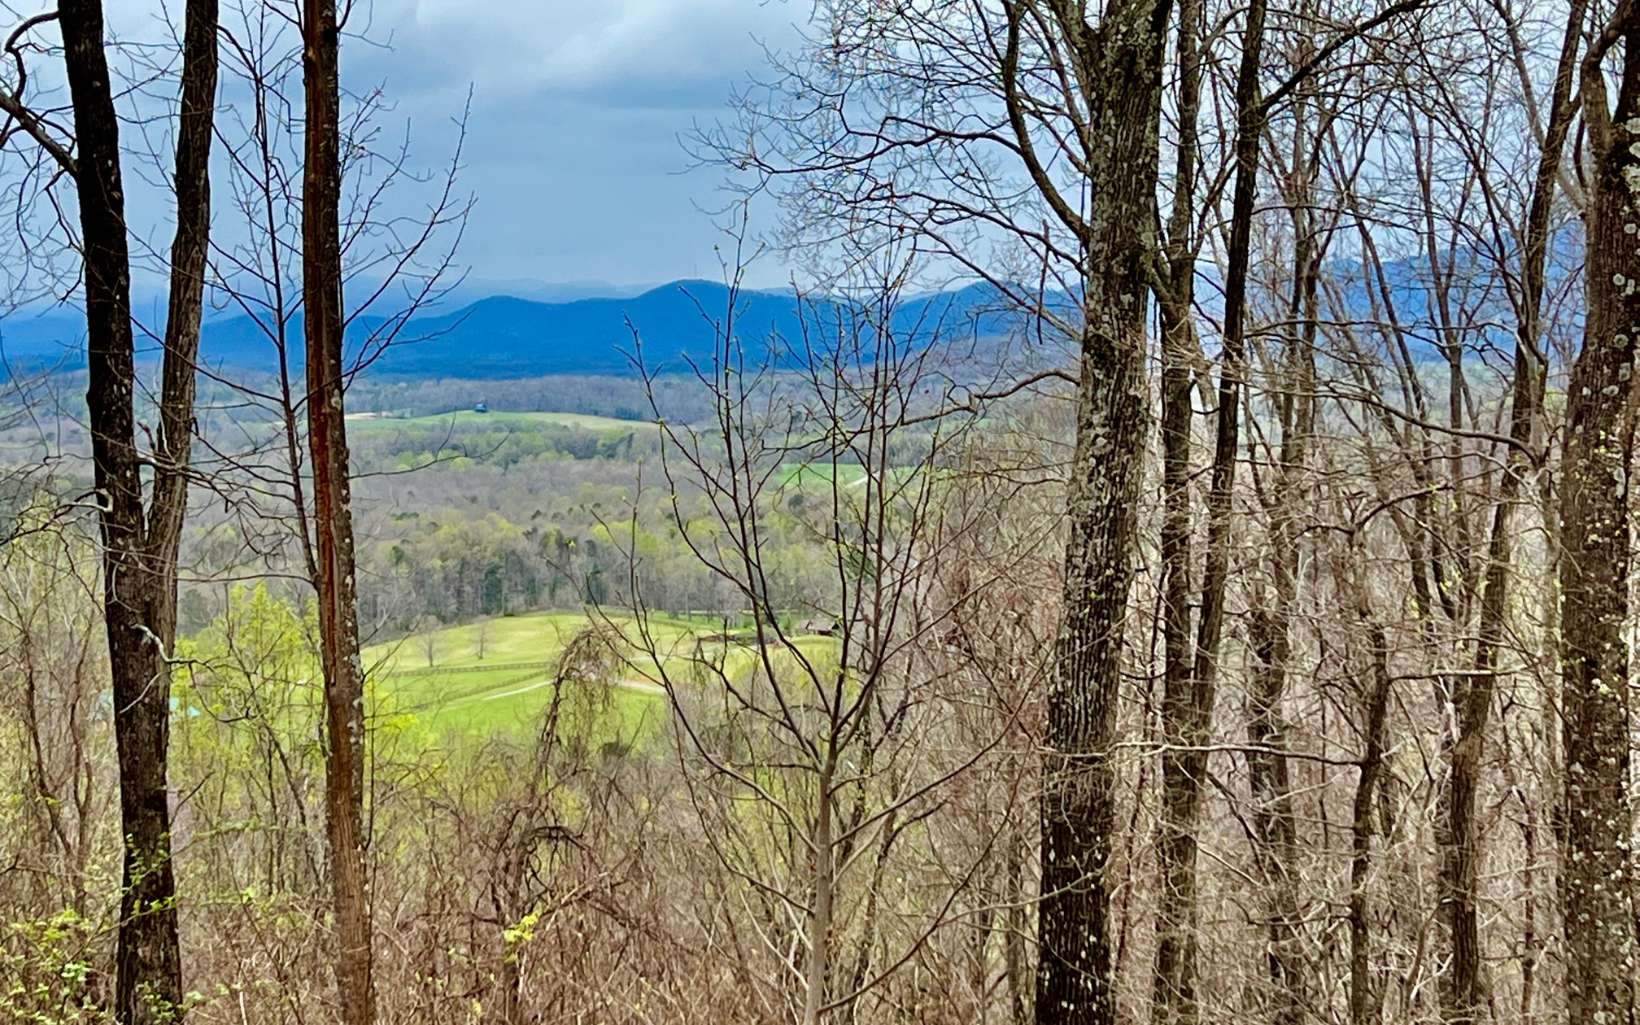 If you are looking for SPECTULAR YEAR ROUND MTN VIEWS on 8.82 acres located in a mountain community with the WOW factor...please check out Lot 191 in FALLING WATERS. This lot adjoins 415 acres conservation forest land. A beautiful paradise tucked gently in the stunning mountains of N Ga. Just as soon as you pull up to the groomed entrance & large wooded gates, you will be mesmerized by the stunning view that awaits you. This prestigious community has all paved roads, underground utilities, private community lake to enjoy a little fishing or put in your kayak/canoe or gather around the fire pit or maybe a little dinner at the lakeside pavilion. There are many hiking trails, camping sites, and the beautiful water falls. Falling Waters is the perfect getaway to enjoy all that the N Ga Mtns have to offer & just 1.5 hour from Atlanta. You will fall in love!